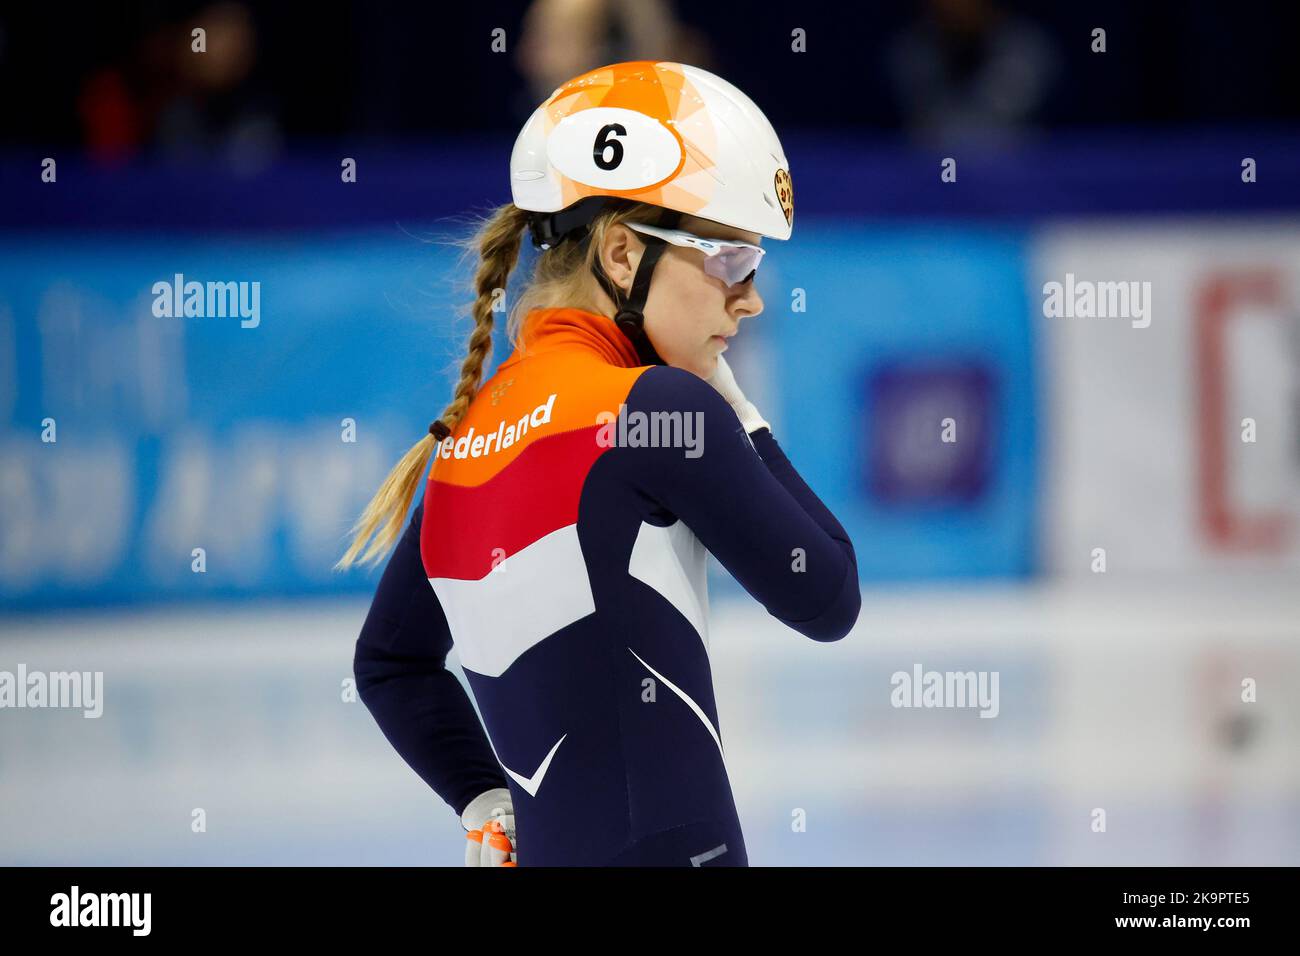 MONTREAL, CANADA - OCTOBER 29: Yara van Kerkhof of The Netherlands competing during the Short Track Speed Skating World Cup at the Maurice-Richard Arena on October 29, 2022 in Montreal, Canada (Photo by Martin Chamberlain/Orange Pictures) Stock Photo